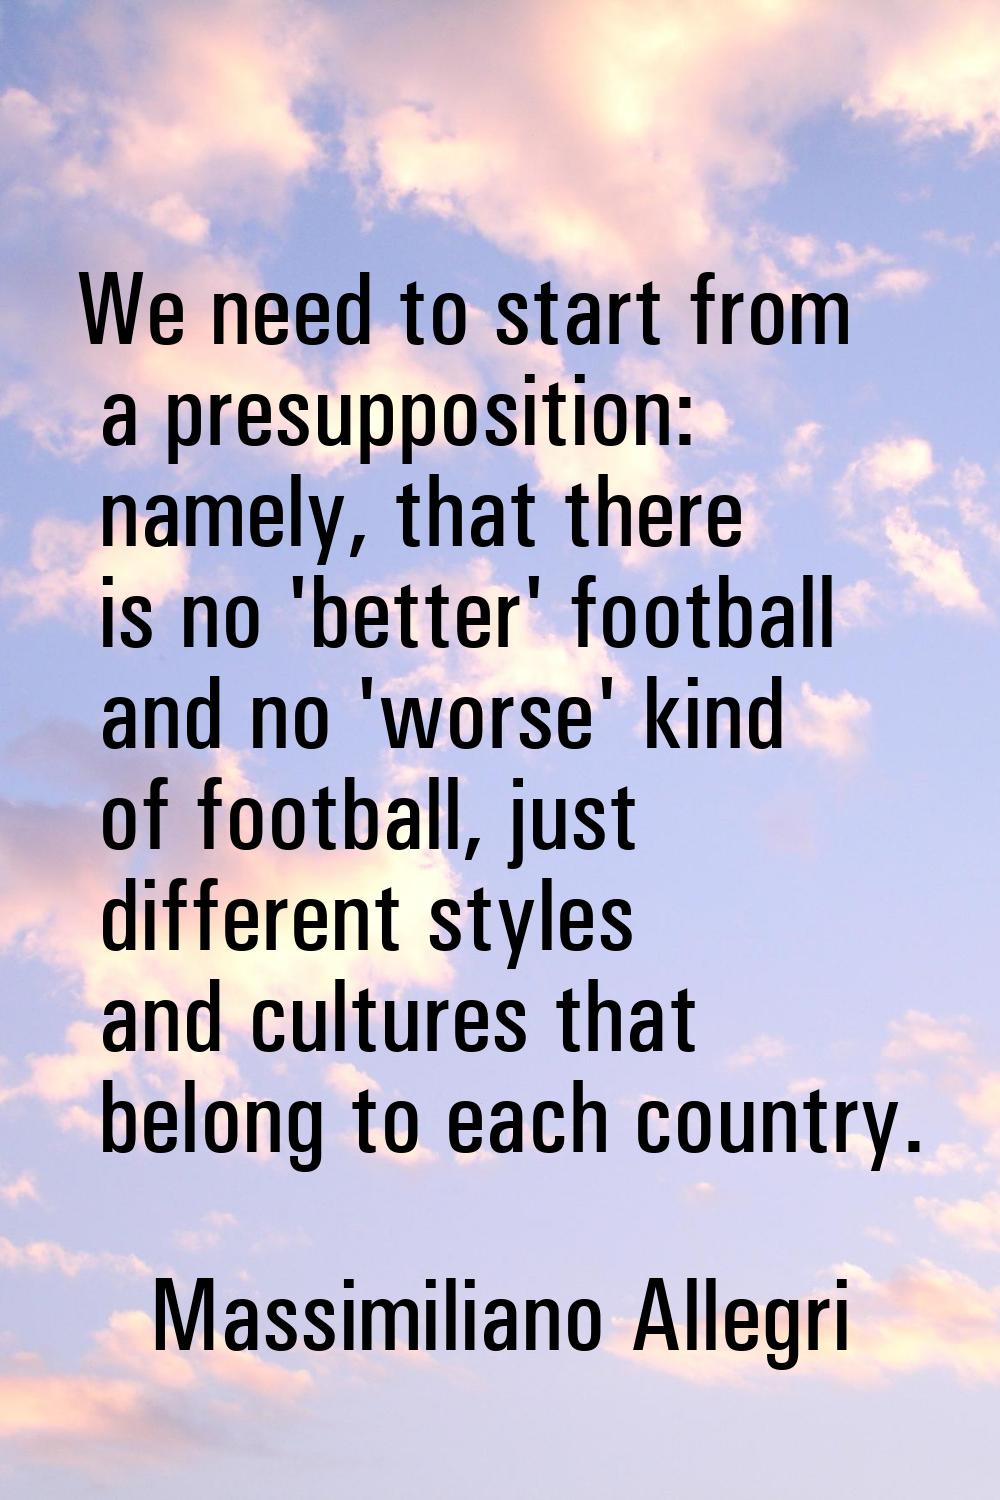 We need to start from a presupposition: namely, that there is no 'better' football and no 'worse' k